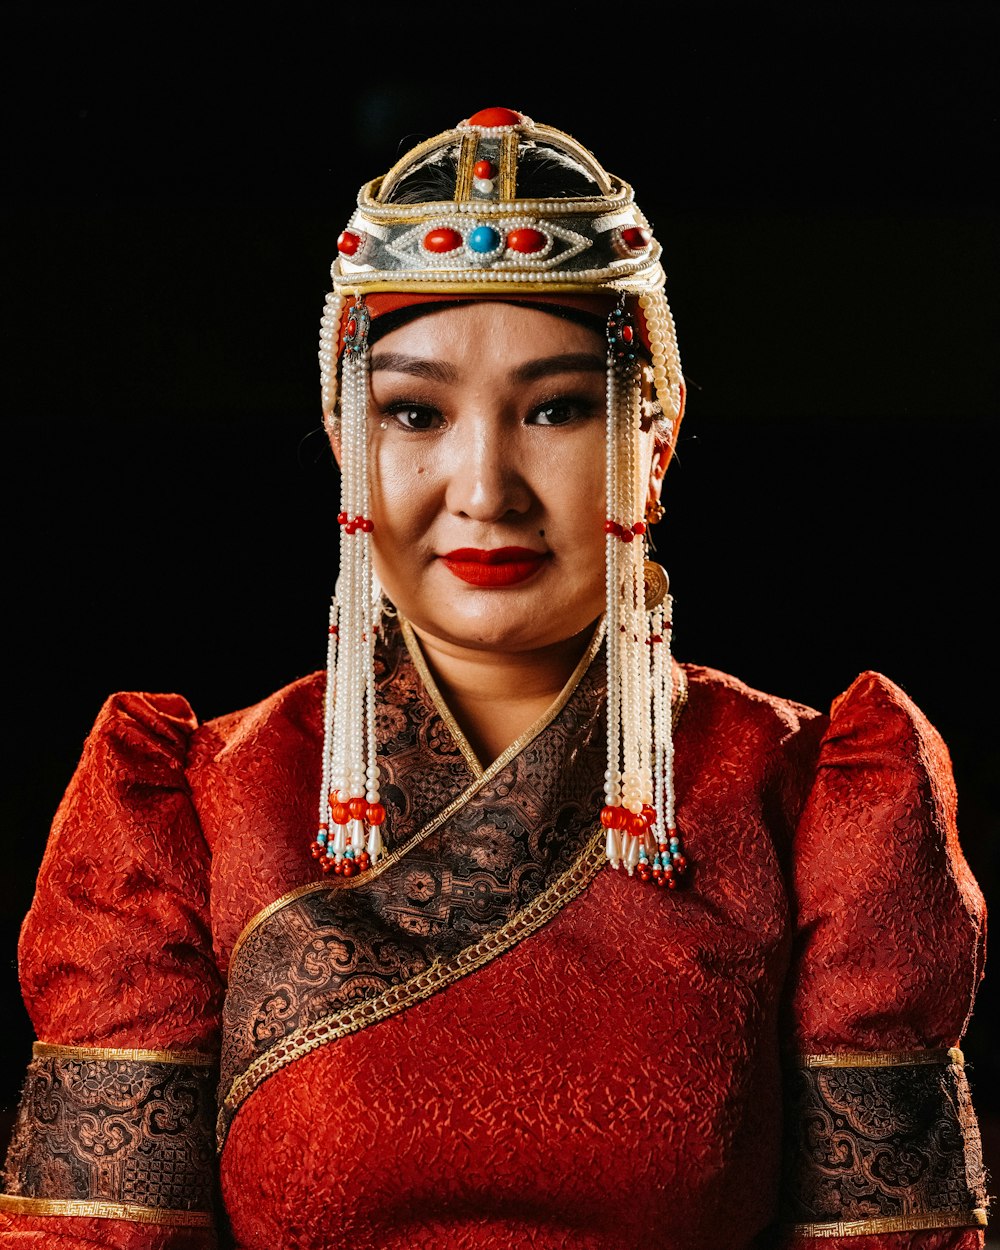 a woman in a red dress and headdress